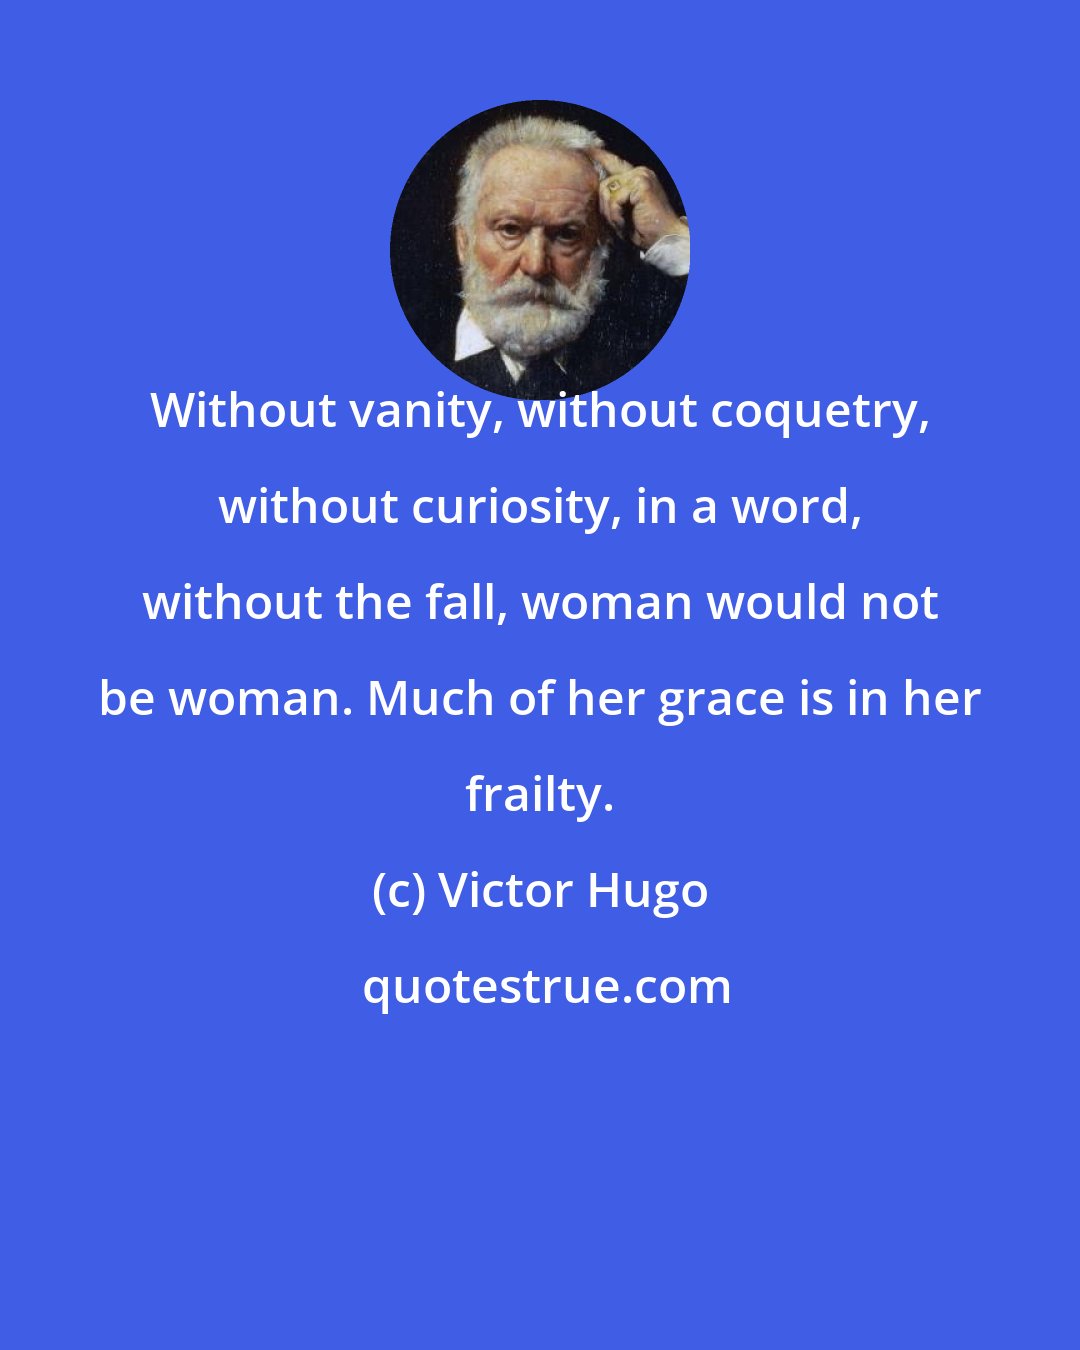 Victor Hugo: Without vanity, without coquetry, without curiosity, in a word, without the fall, woman would not be woman. Much of her grace is in her frailty.